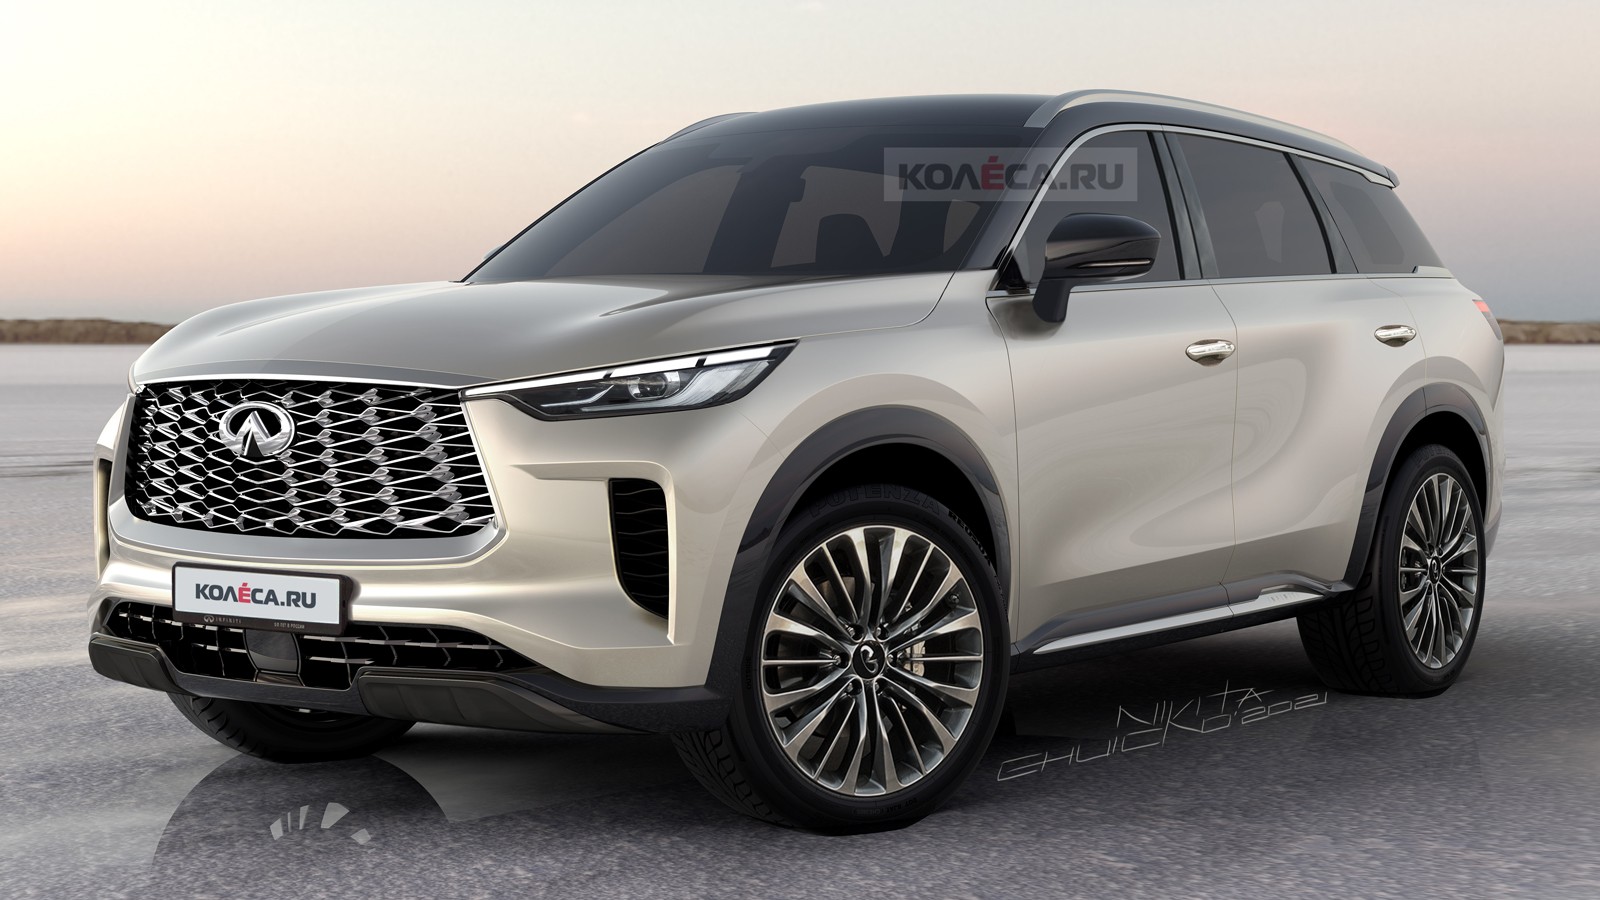 2022 Infiniti QX60: These Illustrations Show What The Production SUV Should  Look Like | Carscoops